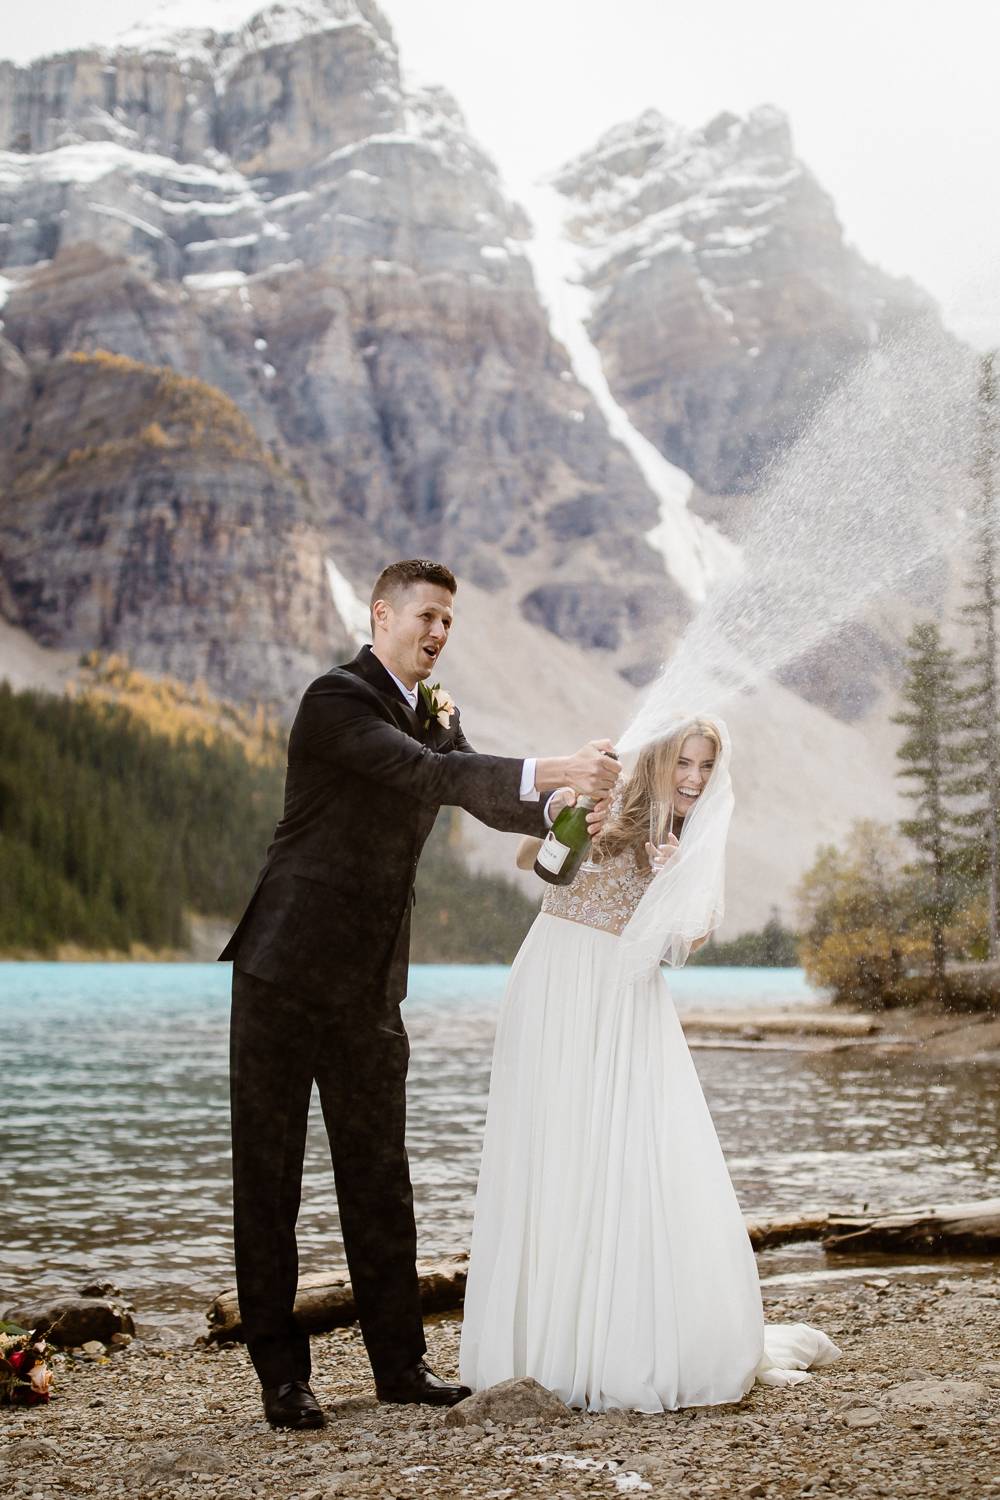 Banff wedding photographer packages